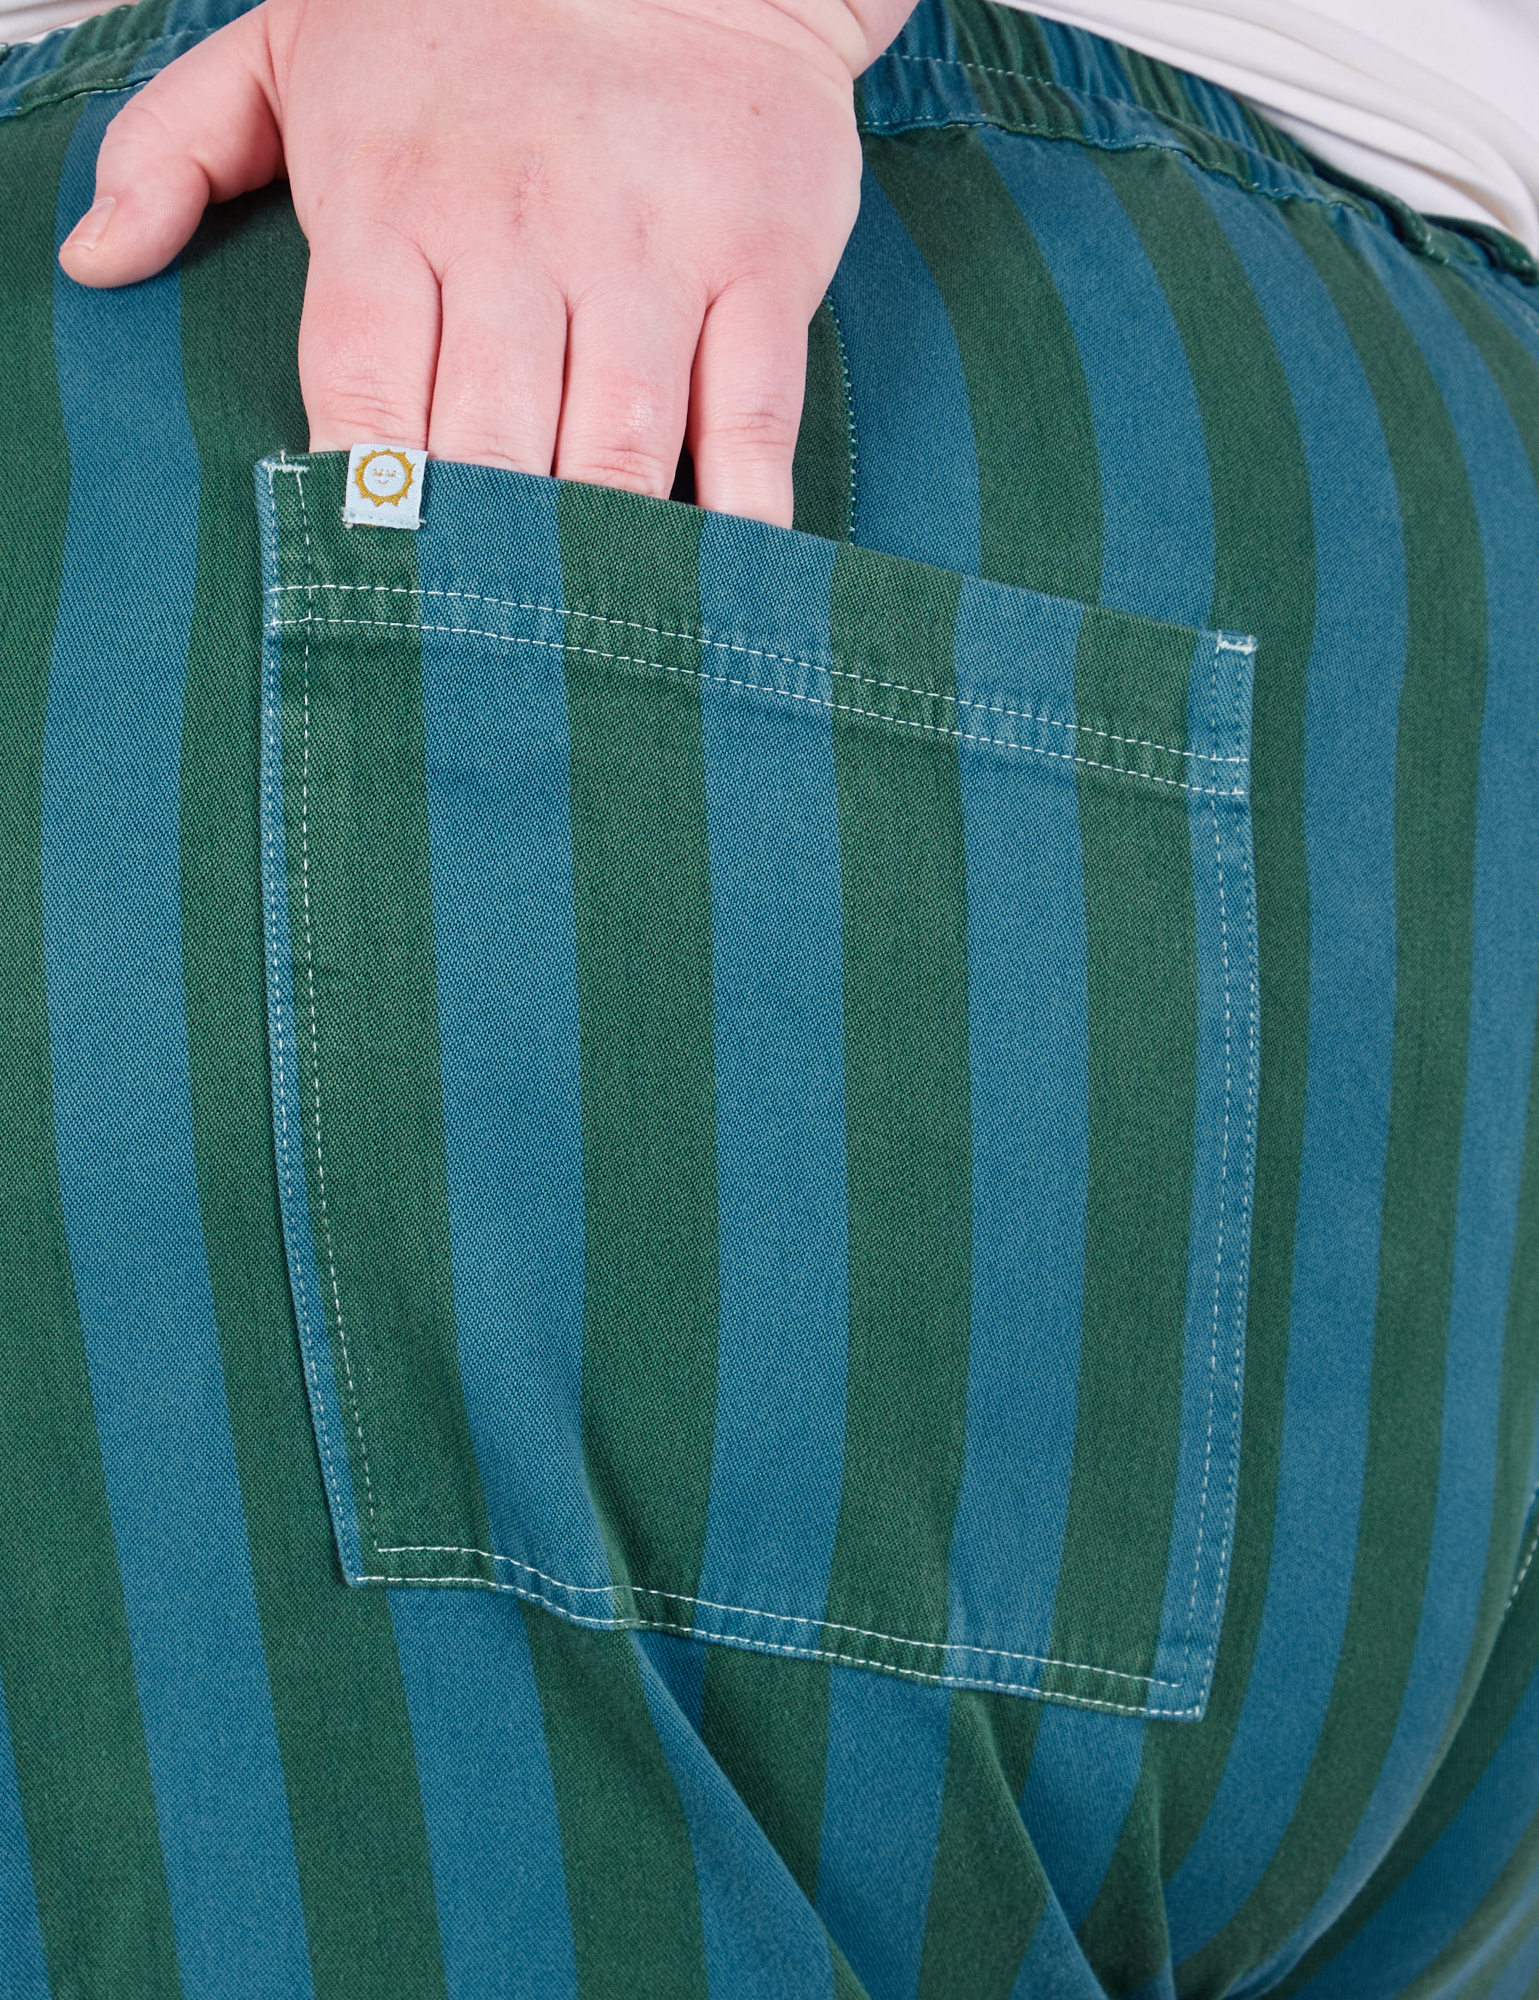 Overdye Stripe Work Pants in Blue/Green back pocket close up. Catie had her hand tucked into the pocket.